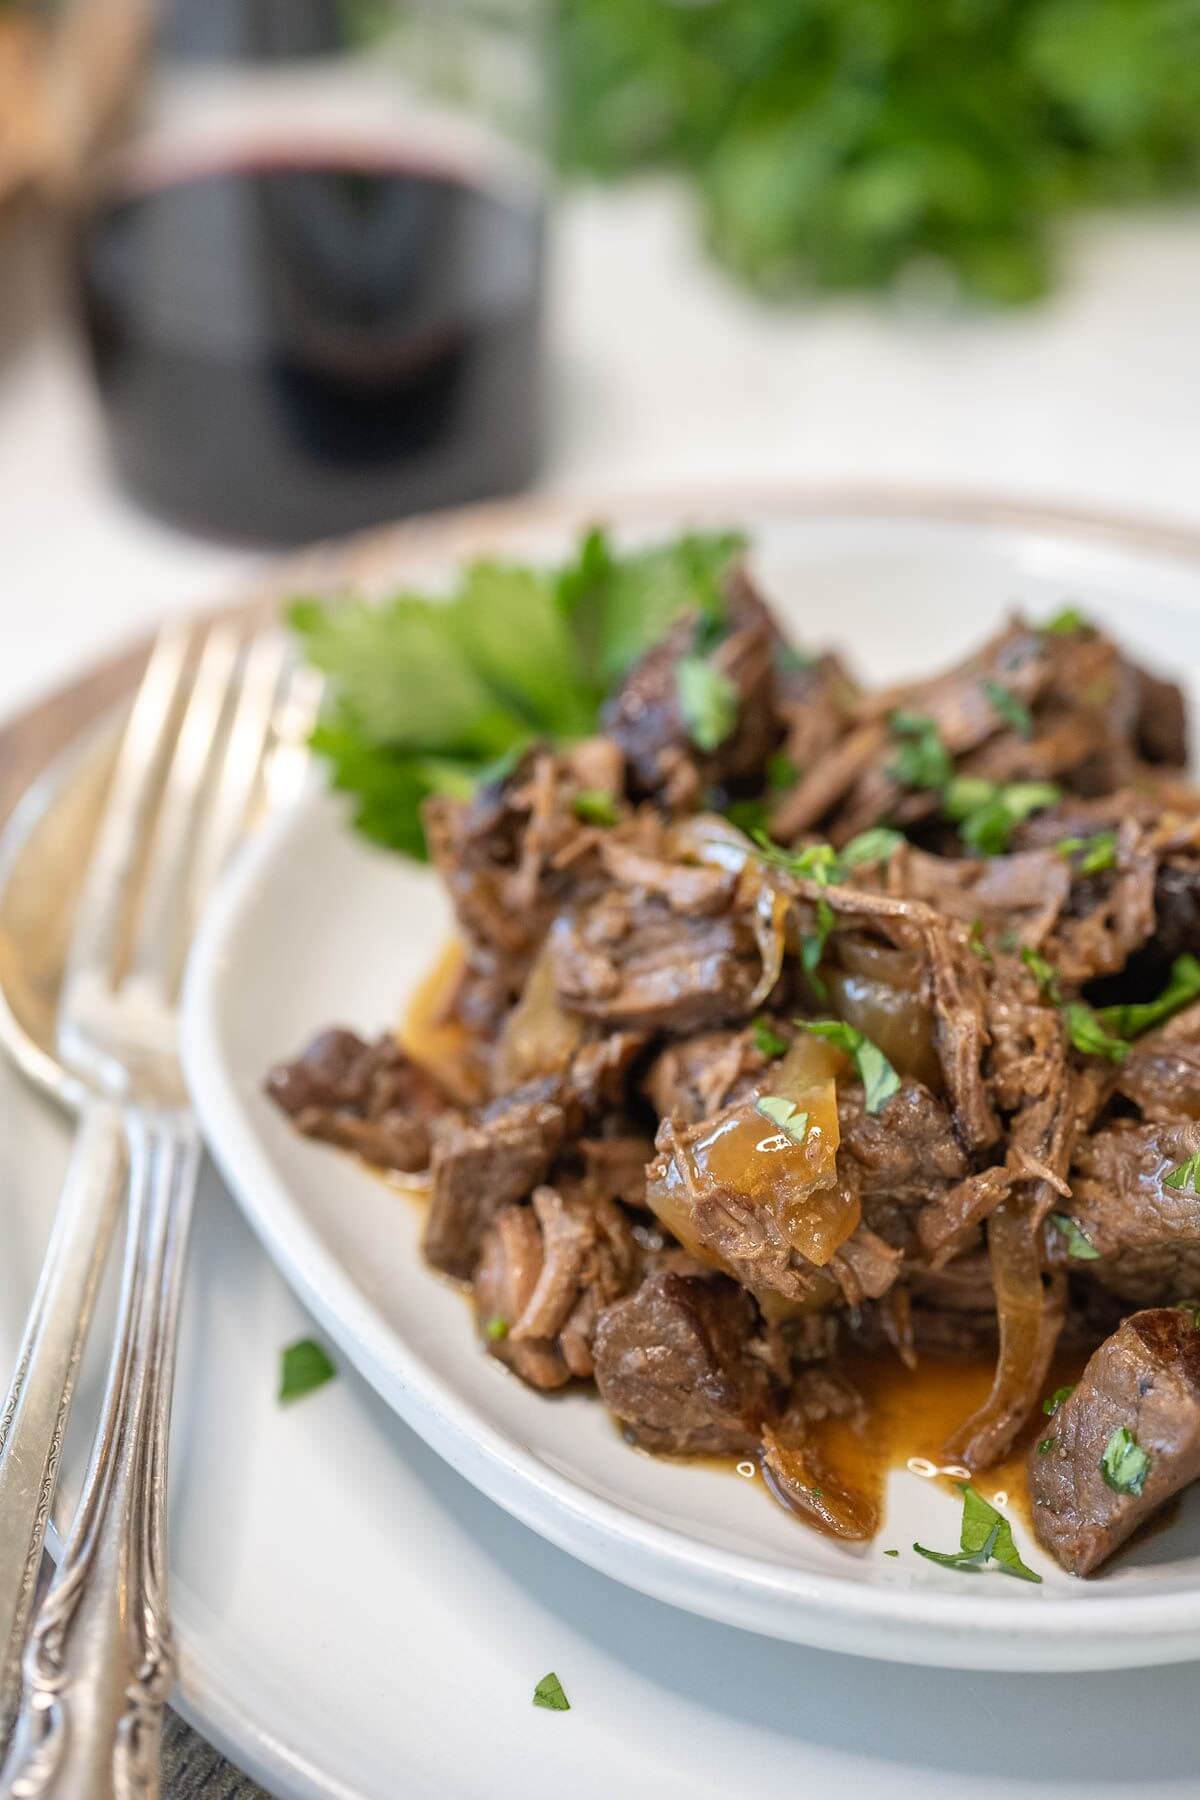 Browned steak bites cover a plate with silverware and wine nearby.